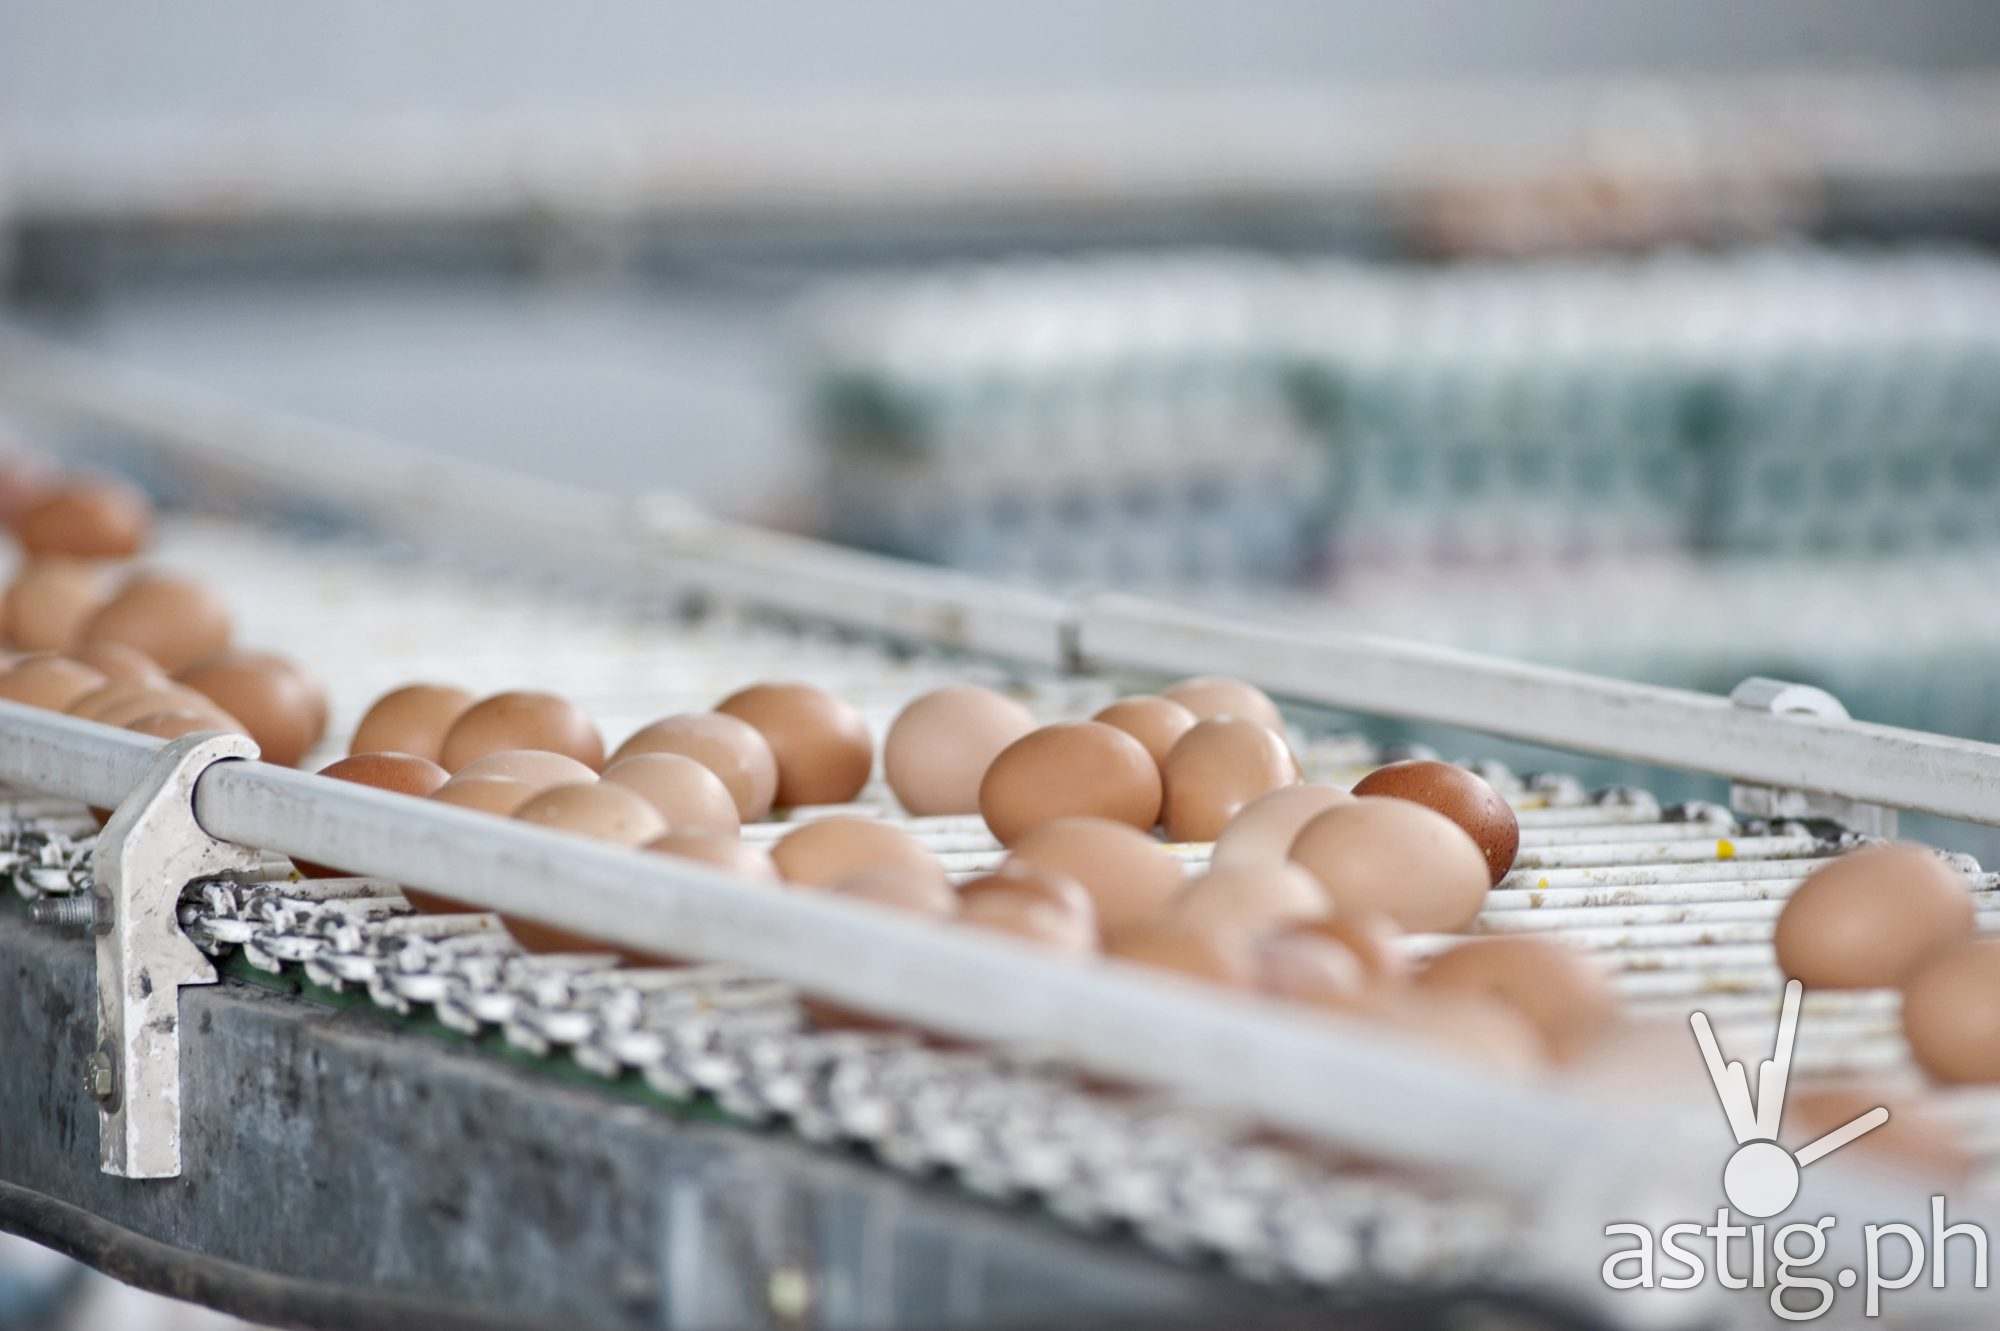 National Survey Finds 83% of Filipino Consumers Want Food Companies to Use Only Cage-Free Eggs